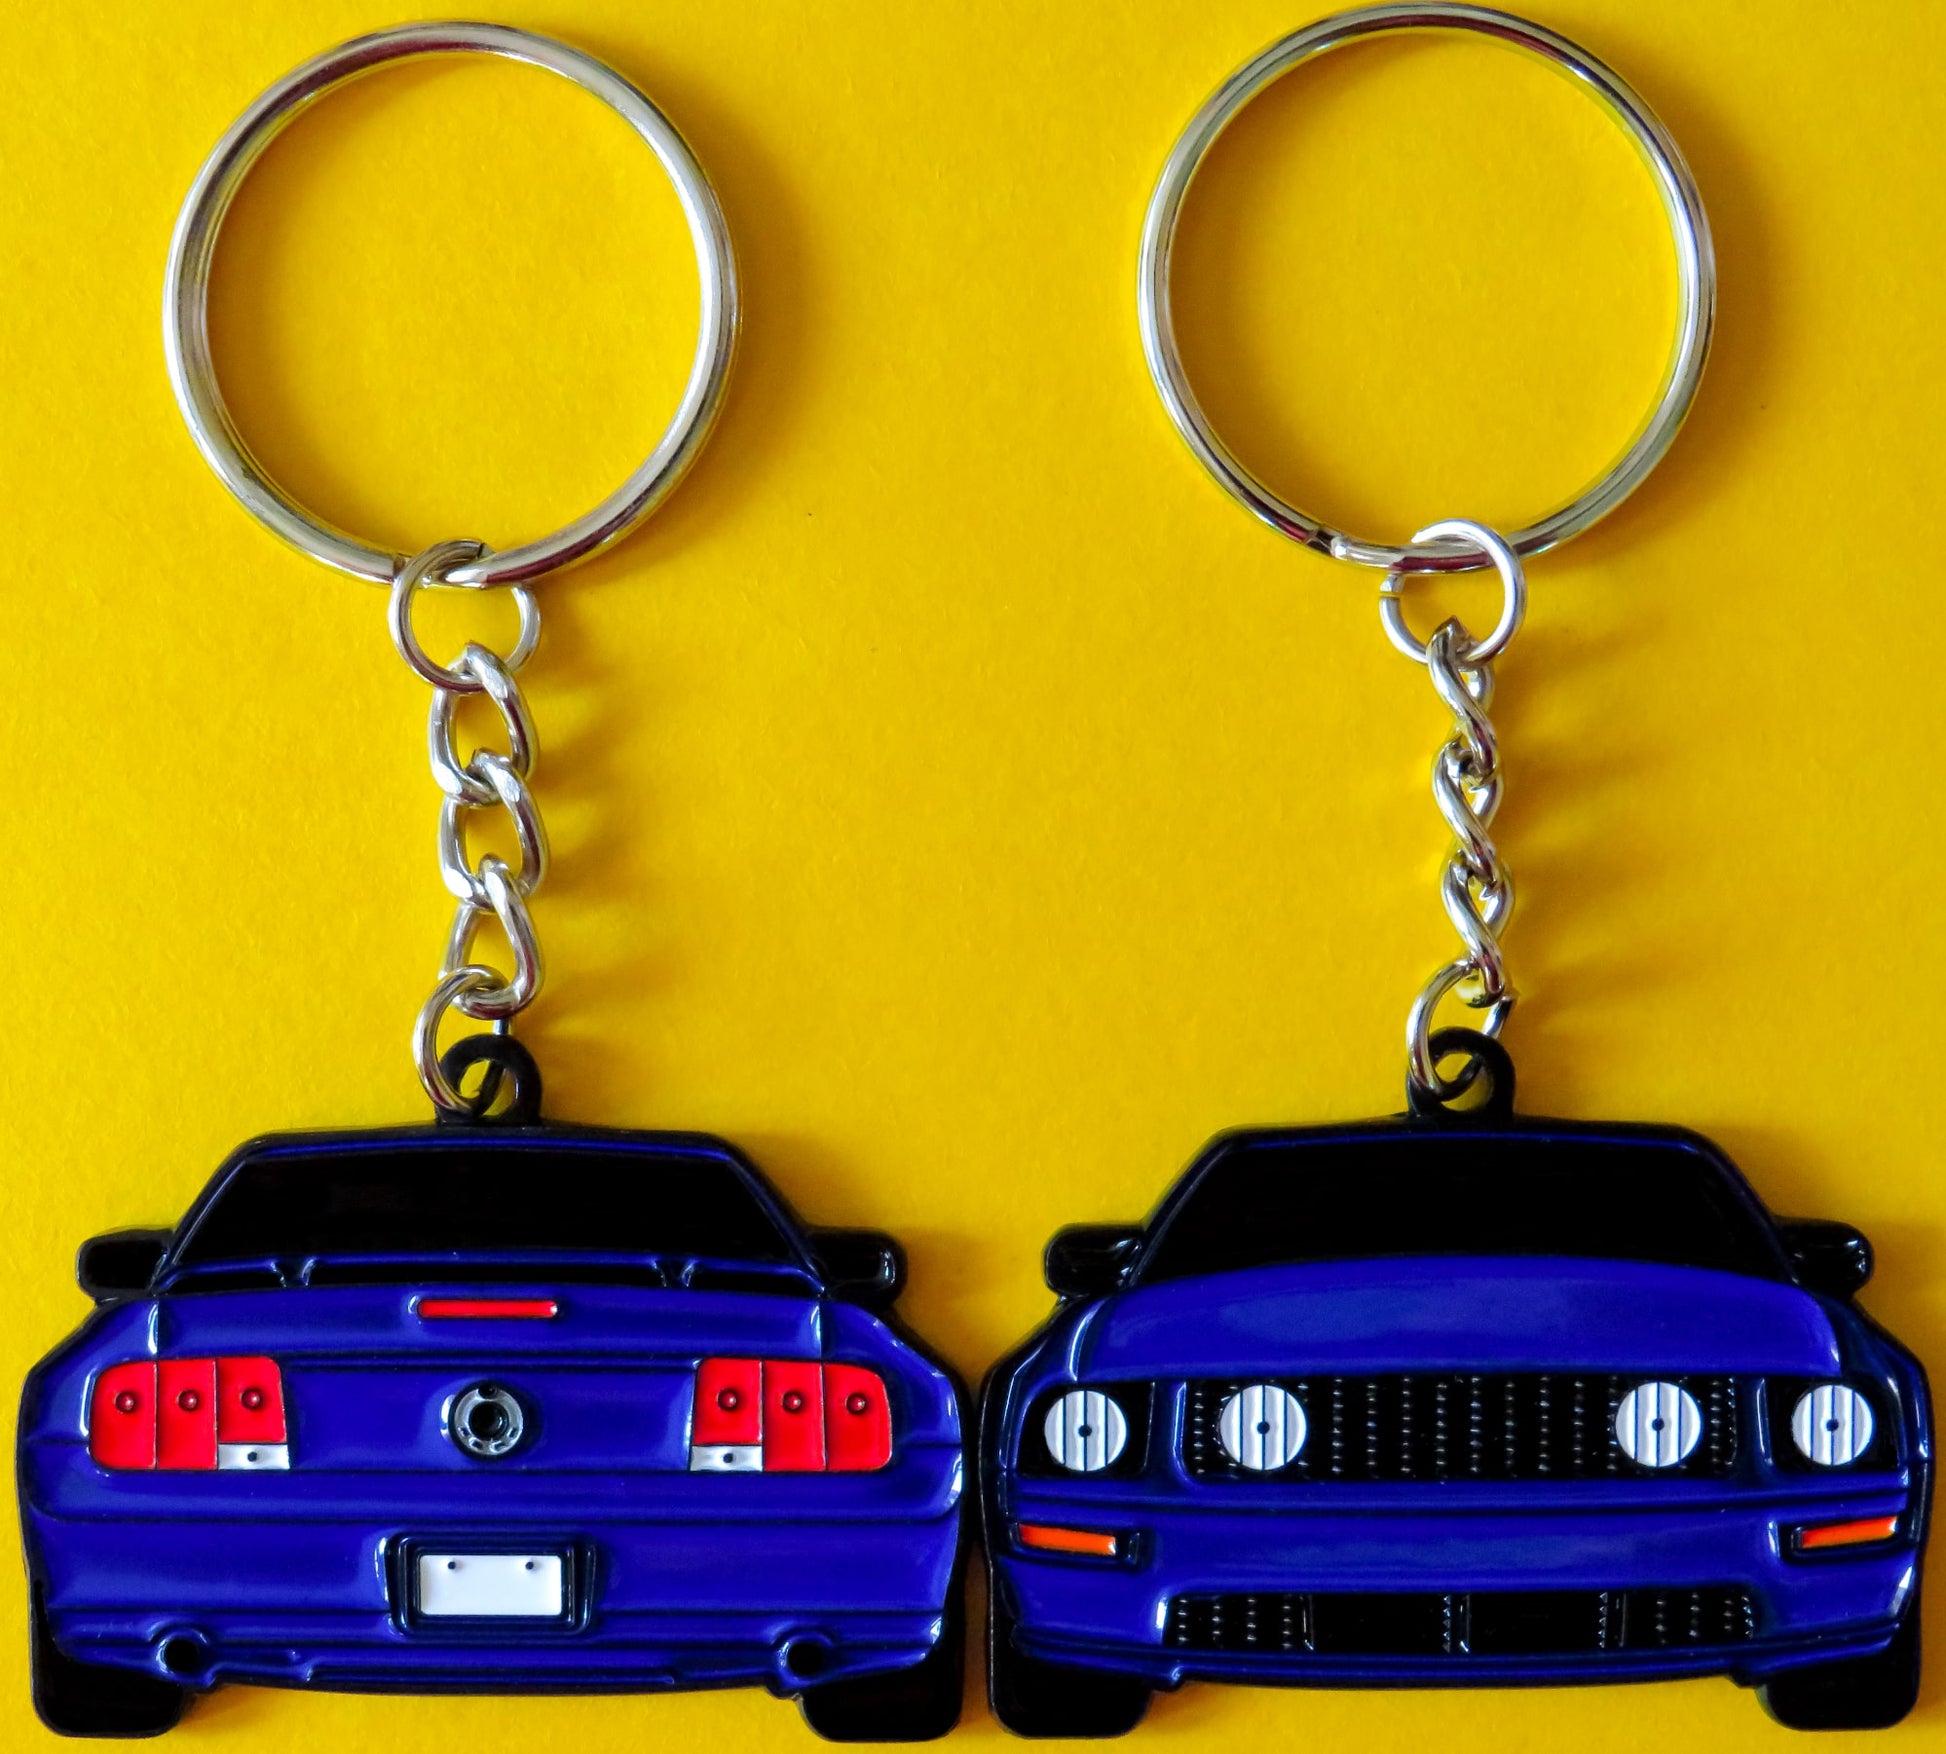 Keychain that fits on a key fob cover for a blue Ford Mustang fifth generation S197 Stang lanyard for car guys and enthusiasts, girlfriend, boyfriend, father, dad, mother, mom, him, her, and more. Apparel and parts for muscle cars 2005 2006 2007 2008 20094.6